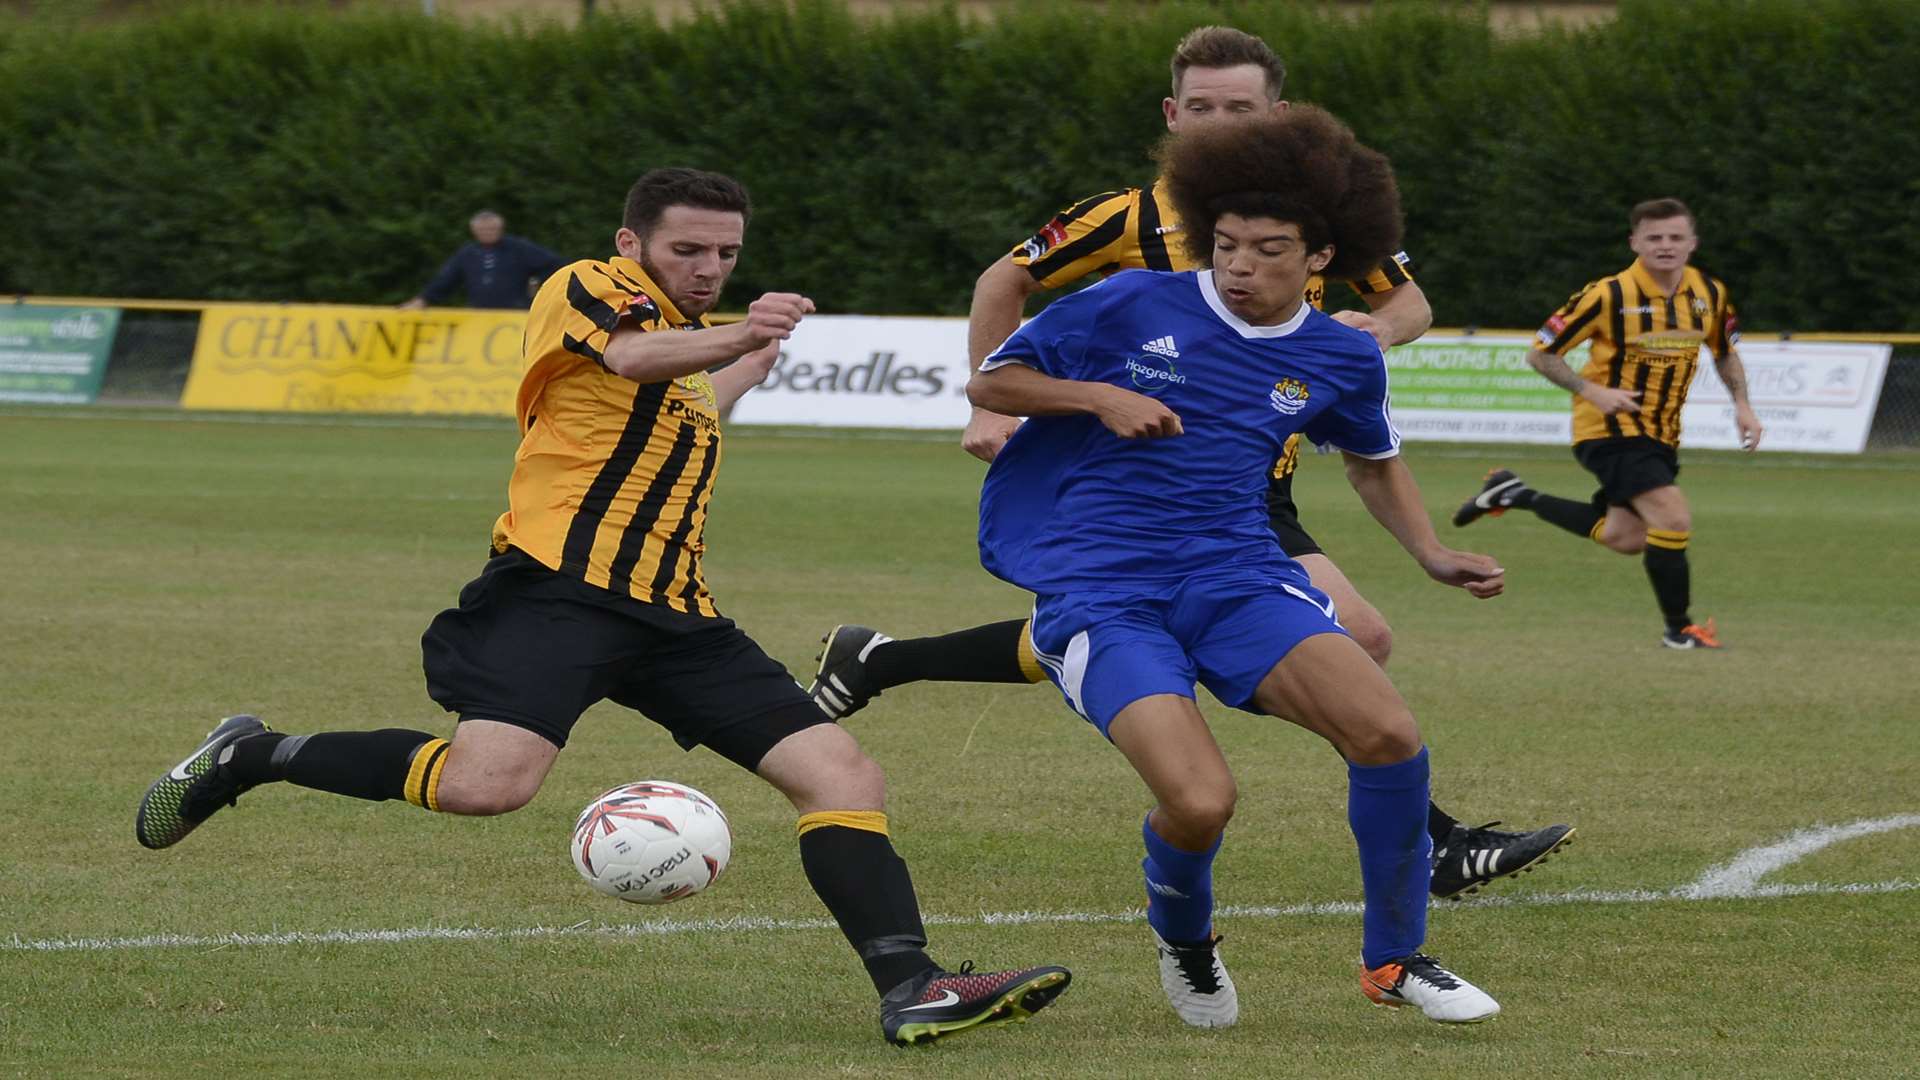 Ian Draycott scored twice in Folkestone's win against North Greenford Picture: Paul Amos